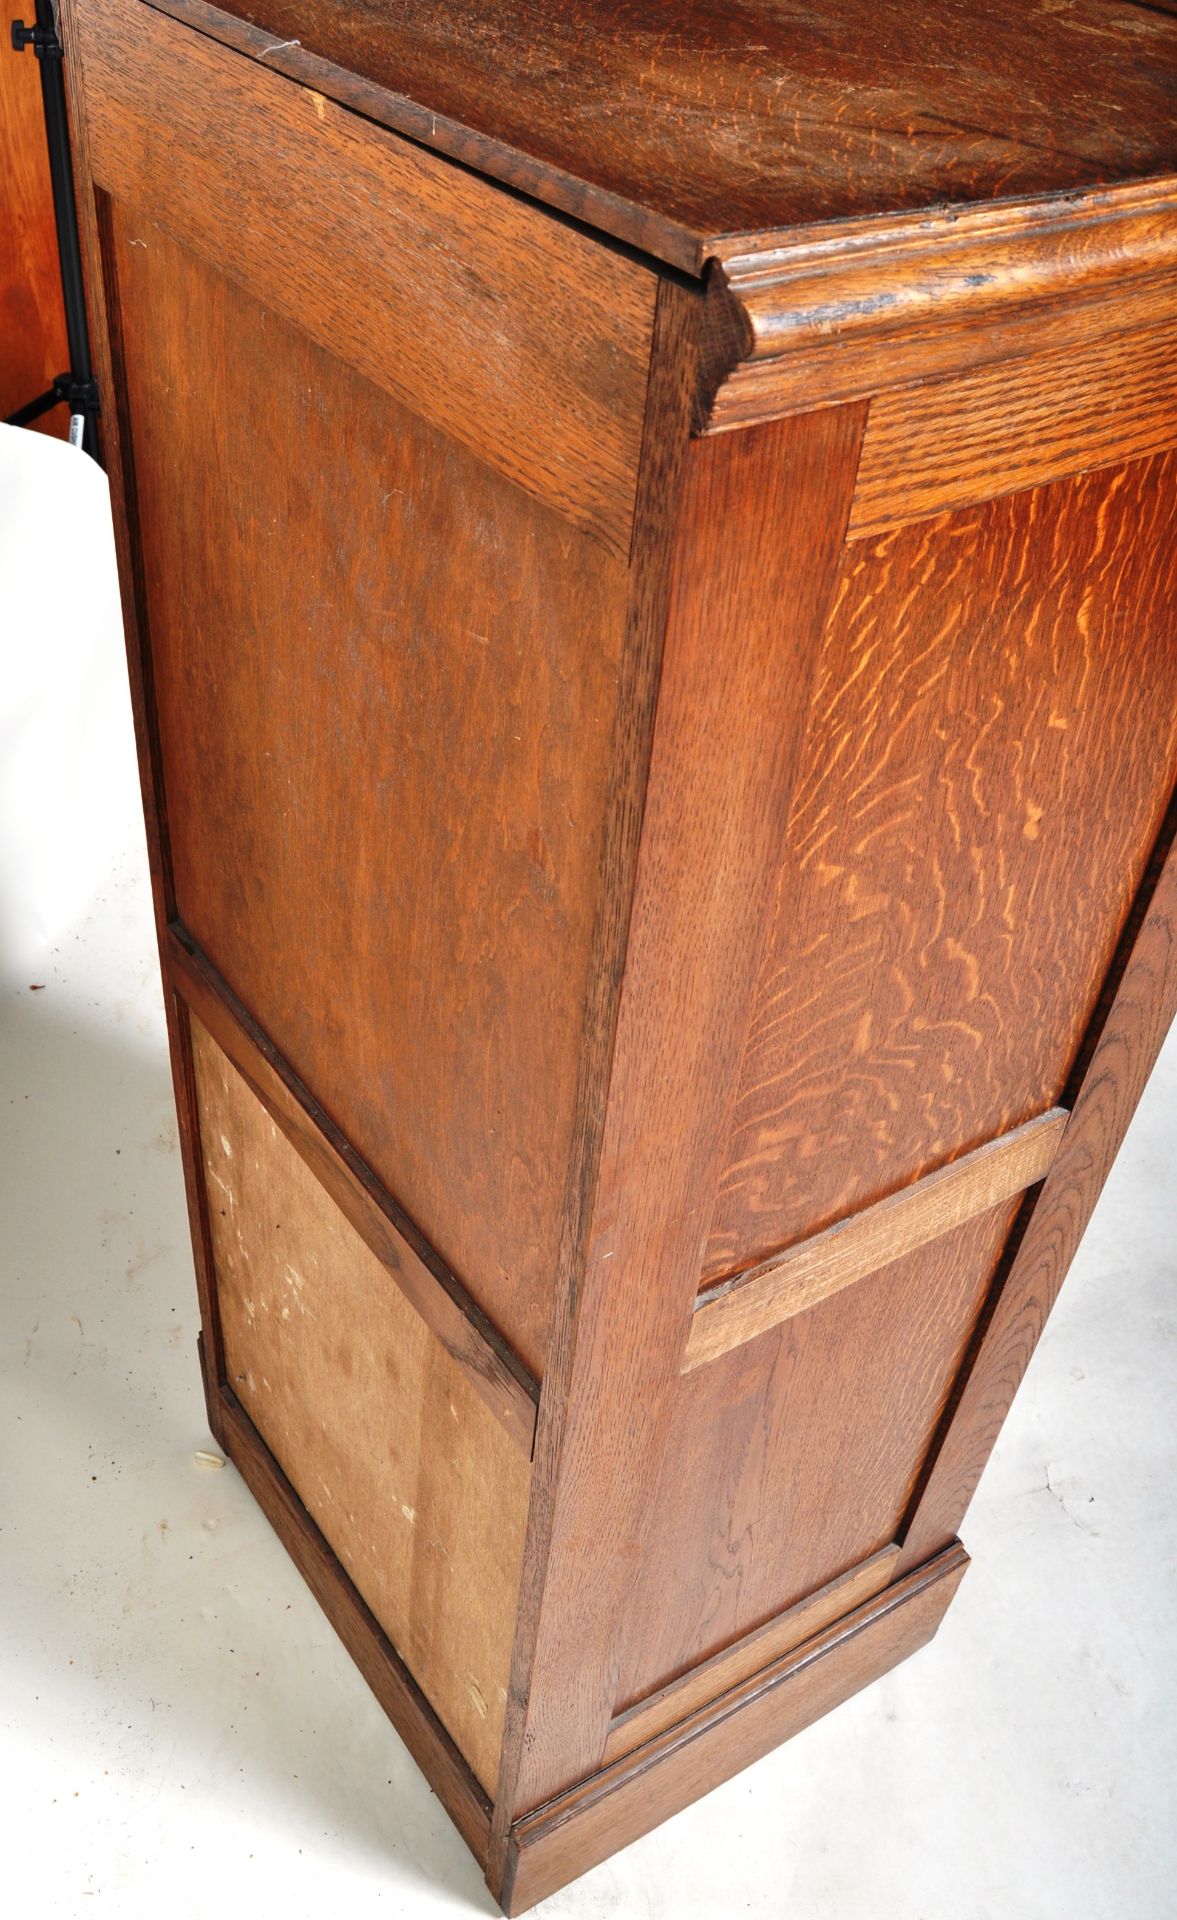 EARLY 20TH CENTURY VINTAGE OAK TAMBOUR FRONTED CABINET - Image 6 of 7